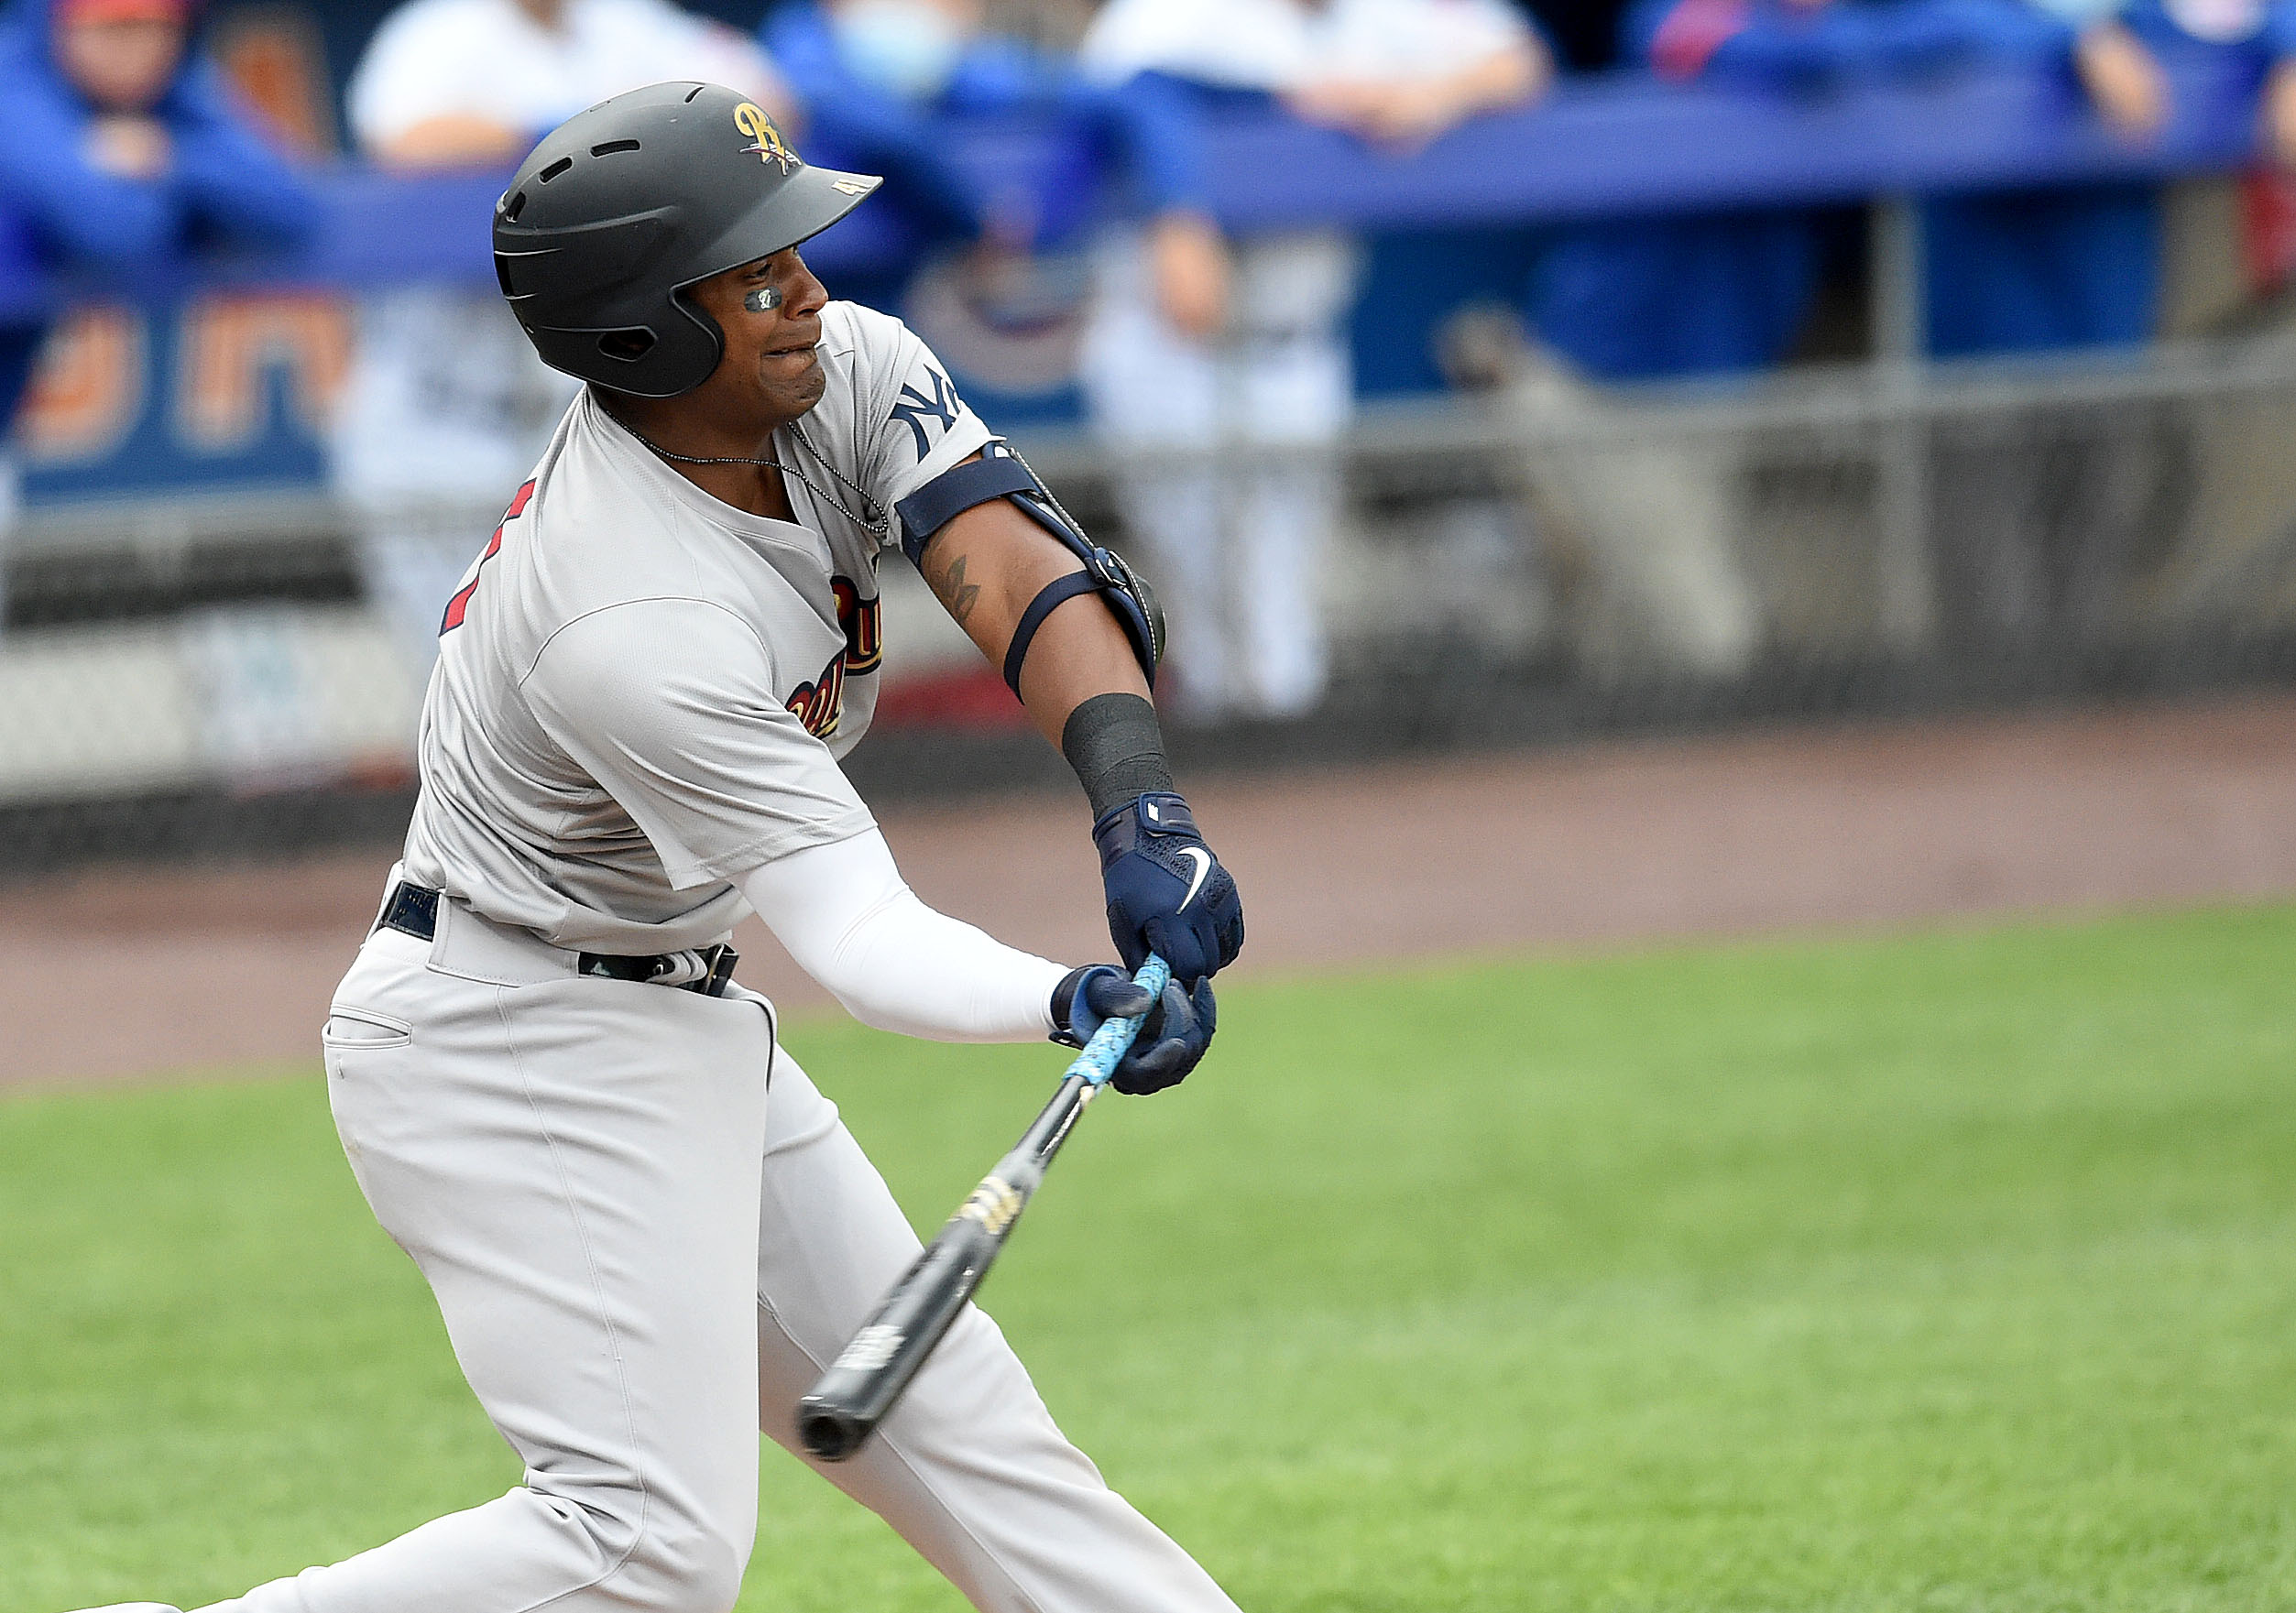 Scranton/Wilkes-Barre grooming Miguel Andujar for Yankees reunion: 'That  bat could really impact' 